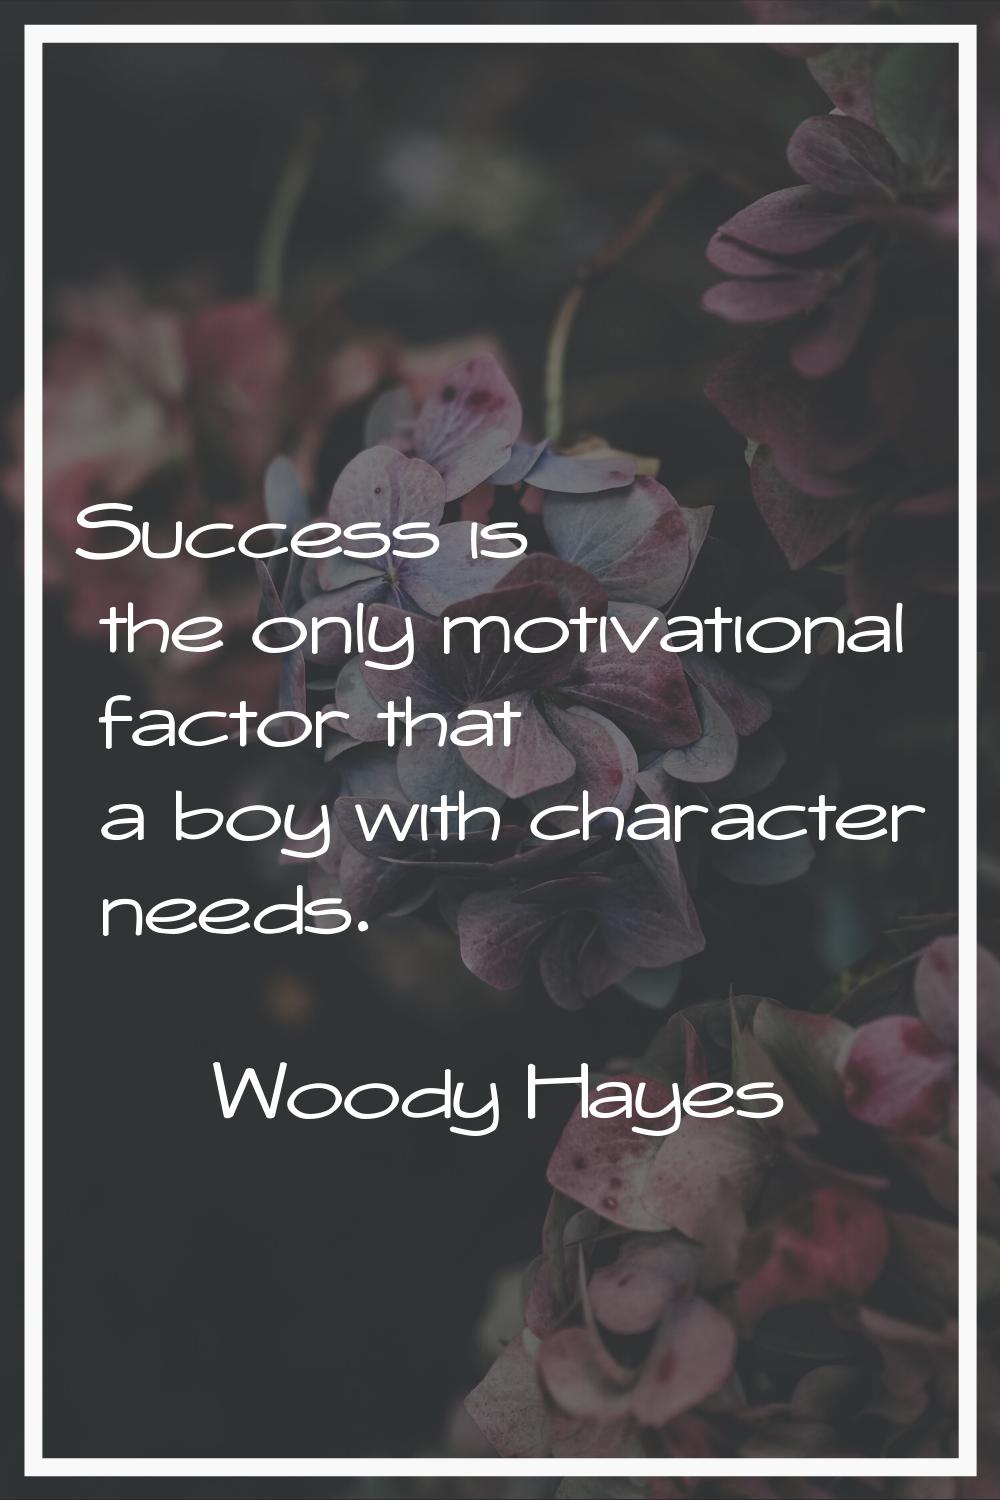 Success is the only motivational factor that a boy with character needs.